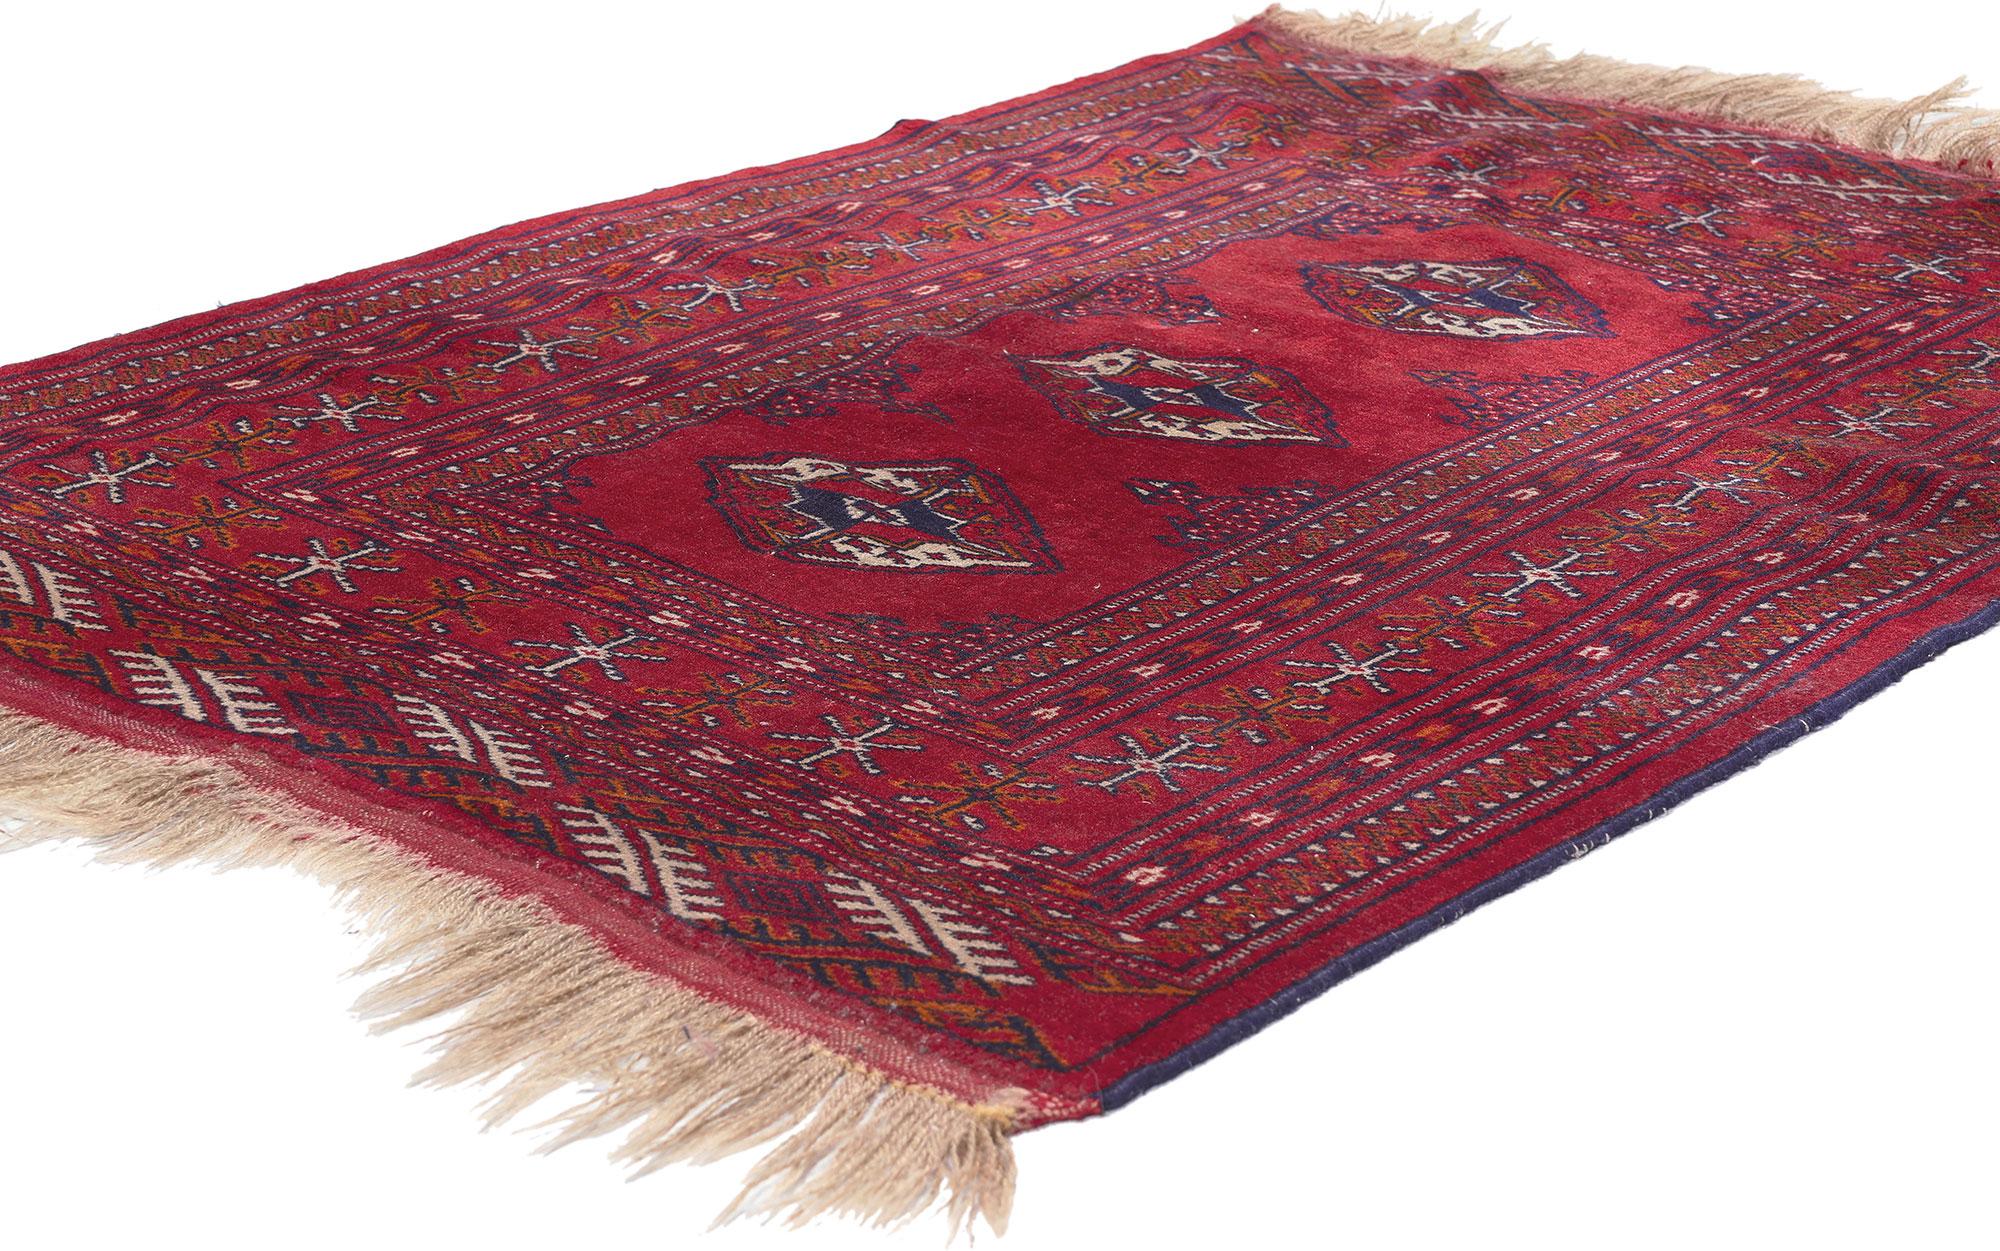 78705 Vintage Persian Turkoman Rug, 02'11 x 03'08. Persian Turkoman rugs, originating from Turkmenistan, Iran, and Afghanistan, are renowned for their quality craftsmanship and intricate designs. Handwoven using traditional techniques like the